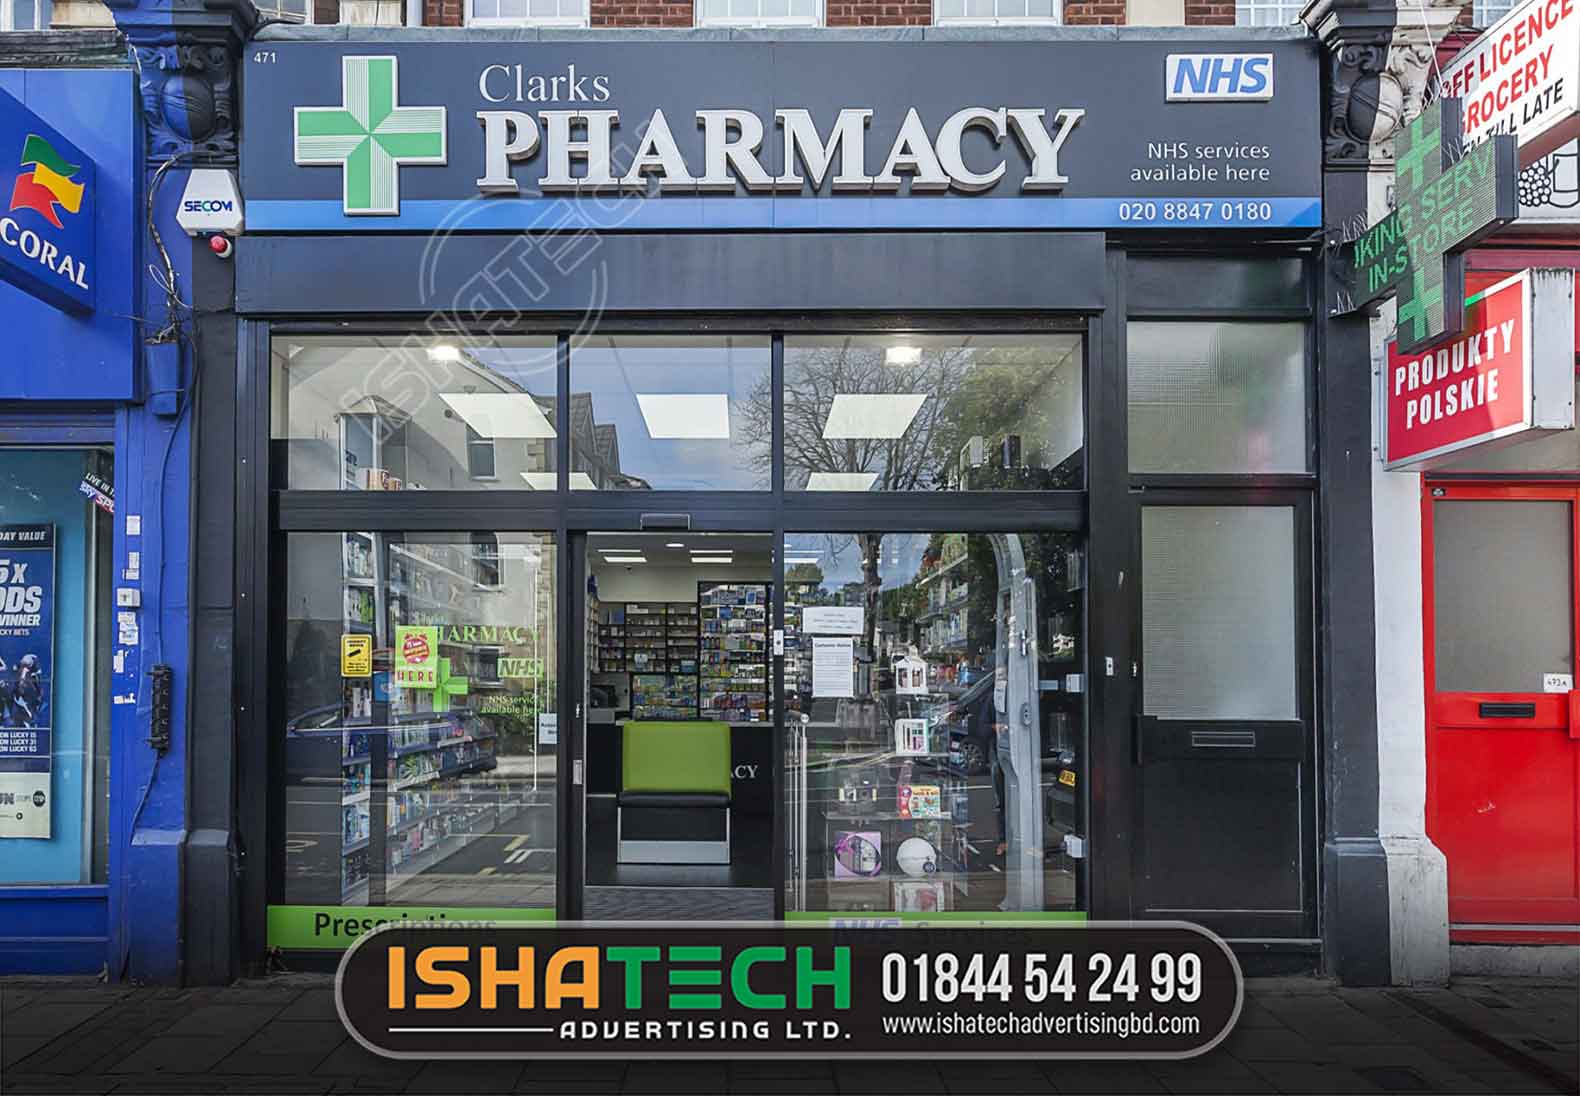 SHOP SIGN, LED LOGO SIGNS FOR PHARMACY IN DHAKA, BANGLADESH. PHARMACY LETTER SIGNBOARD DESIGN AND MAKING CREATE BY ISHATECH ADVERTISING LTD